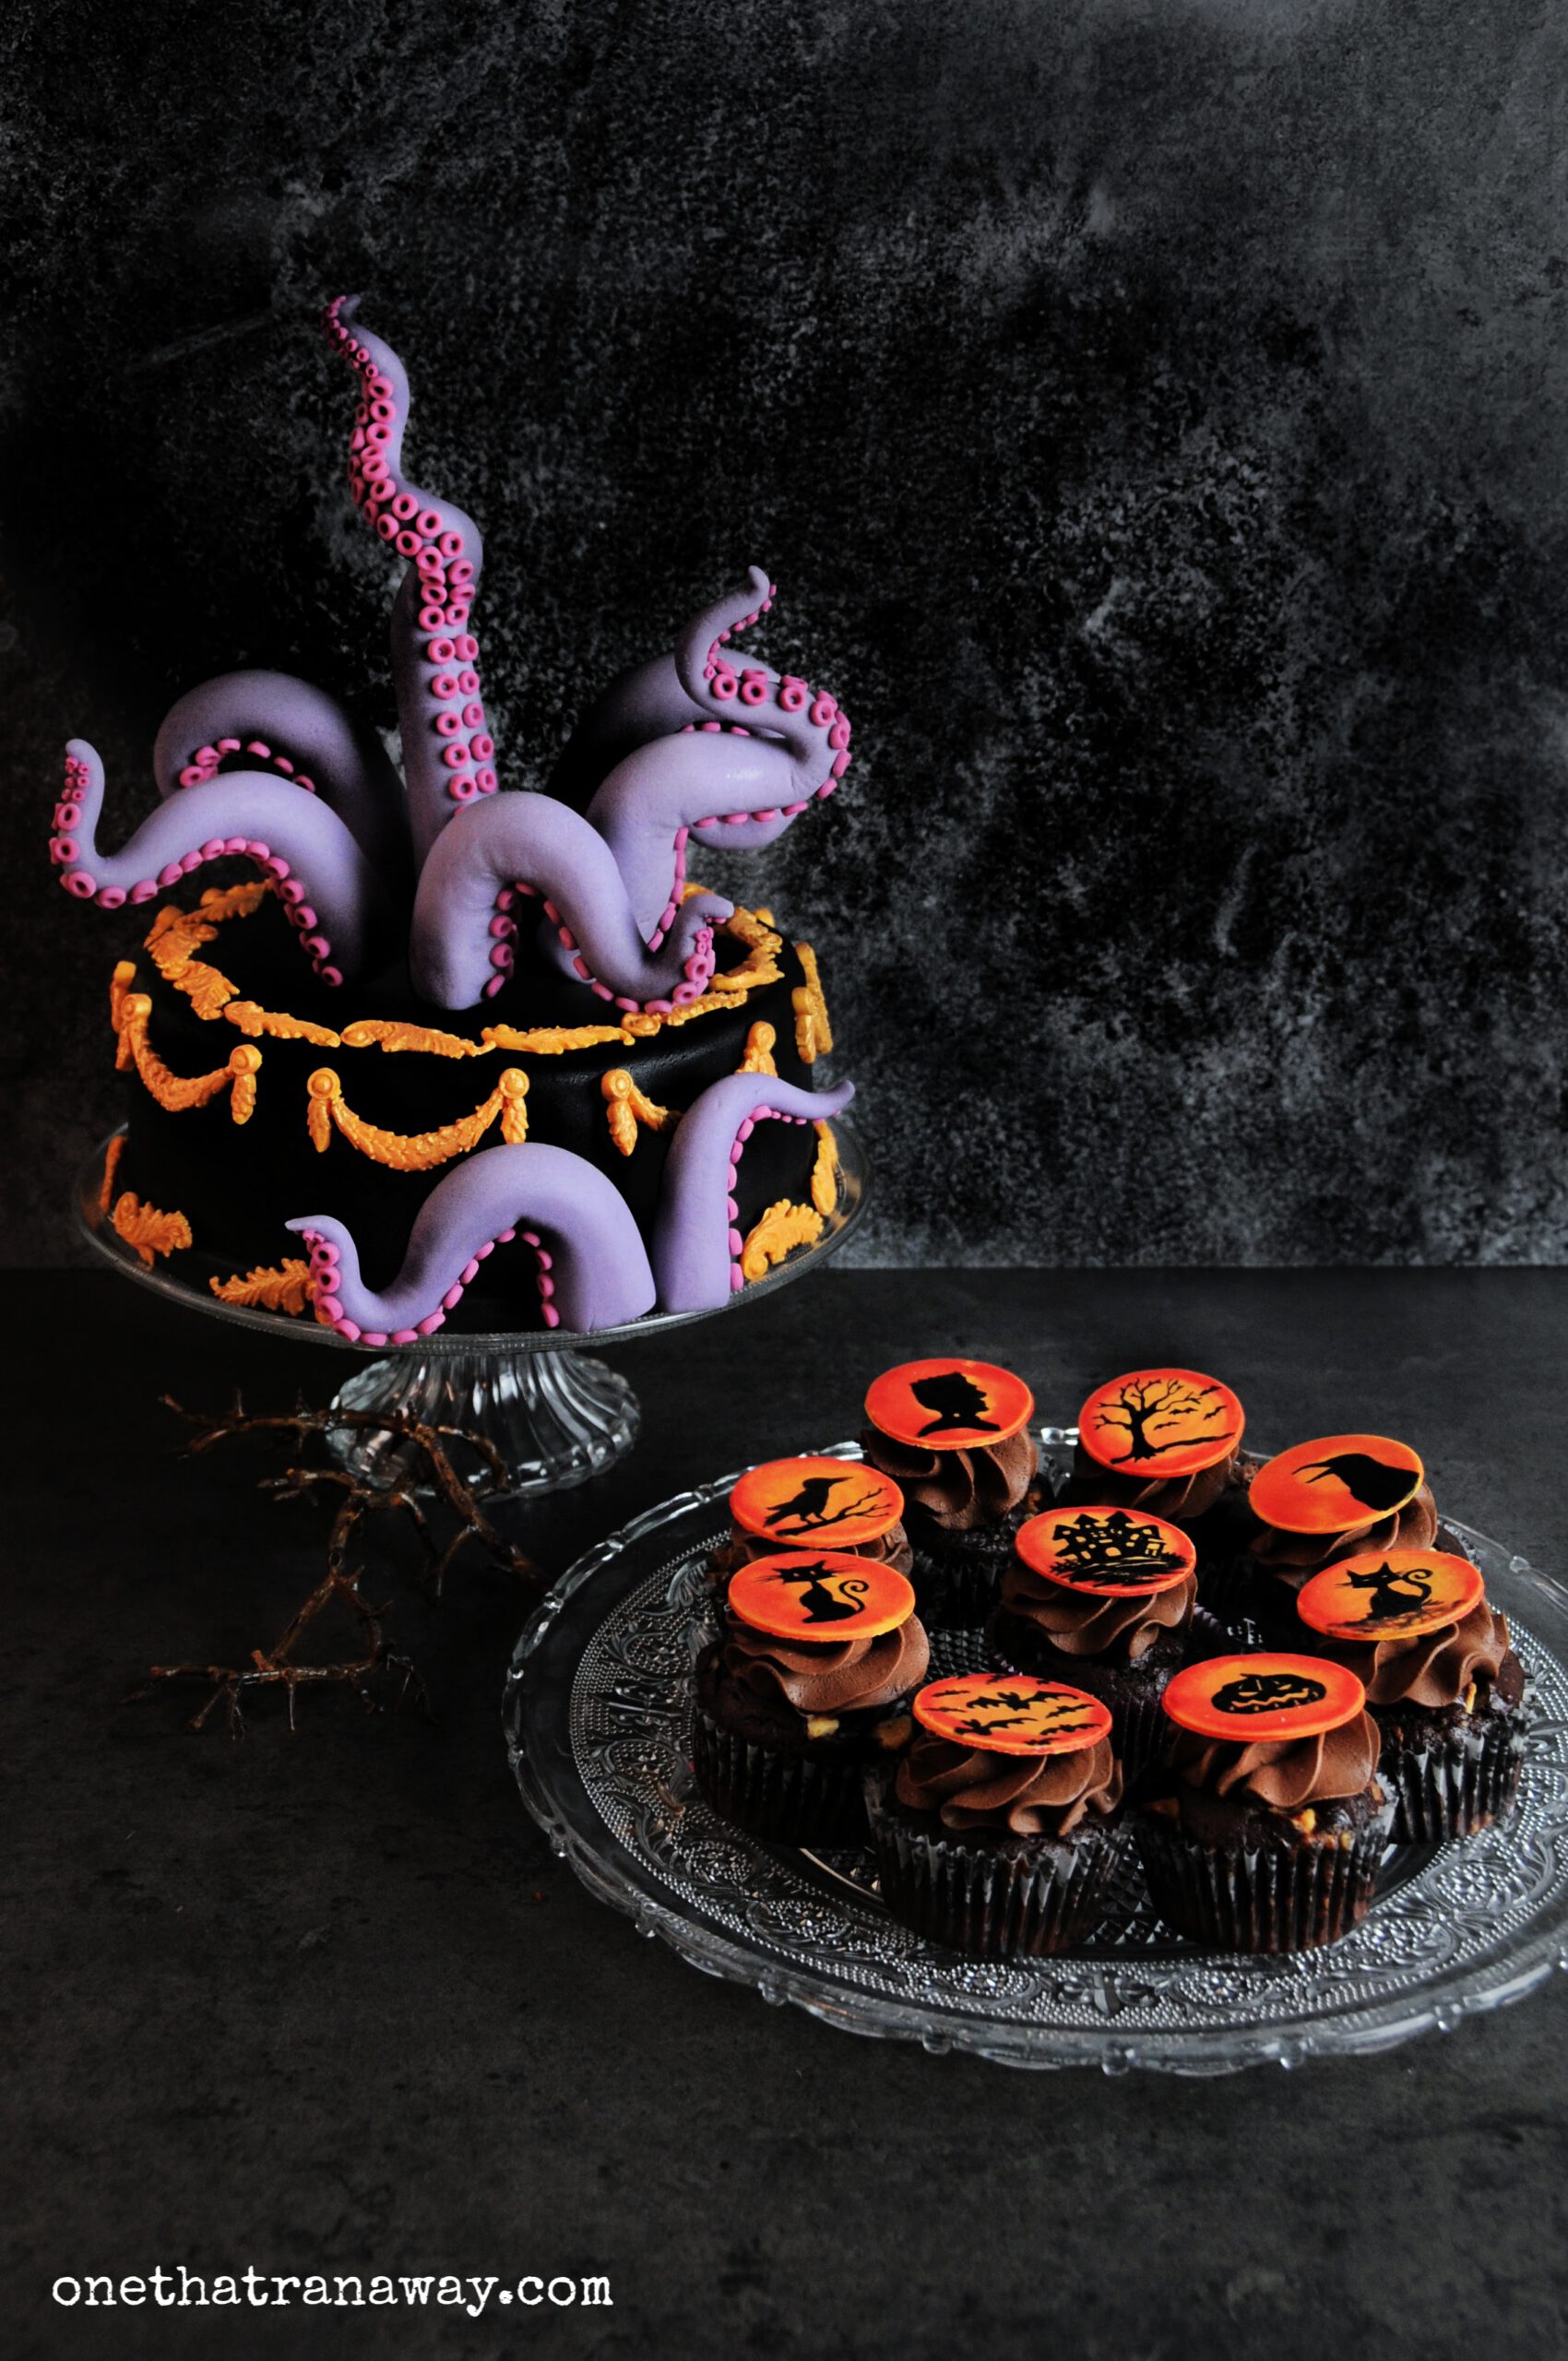 chocolate cupcakes with orange fondant toppers showing Halloween themed silhouettes on black background and a cake with fondant tentacles next to it